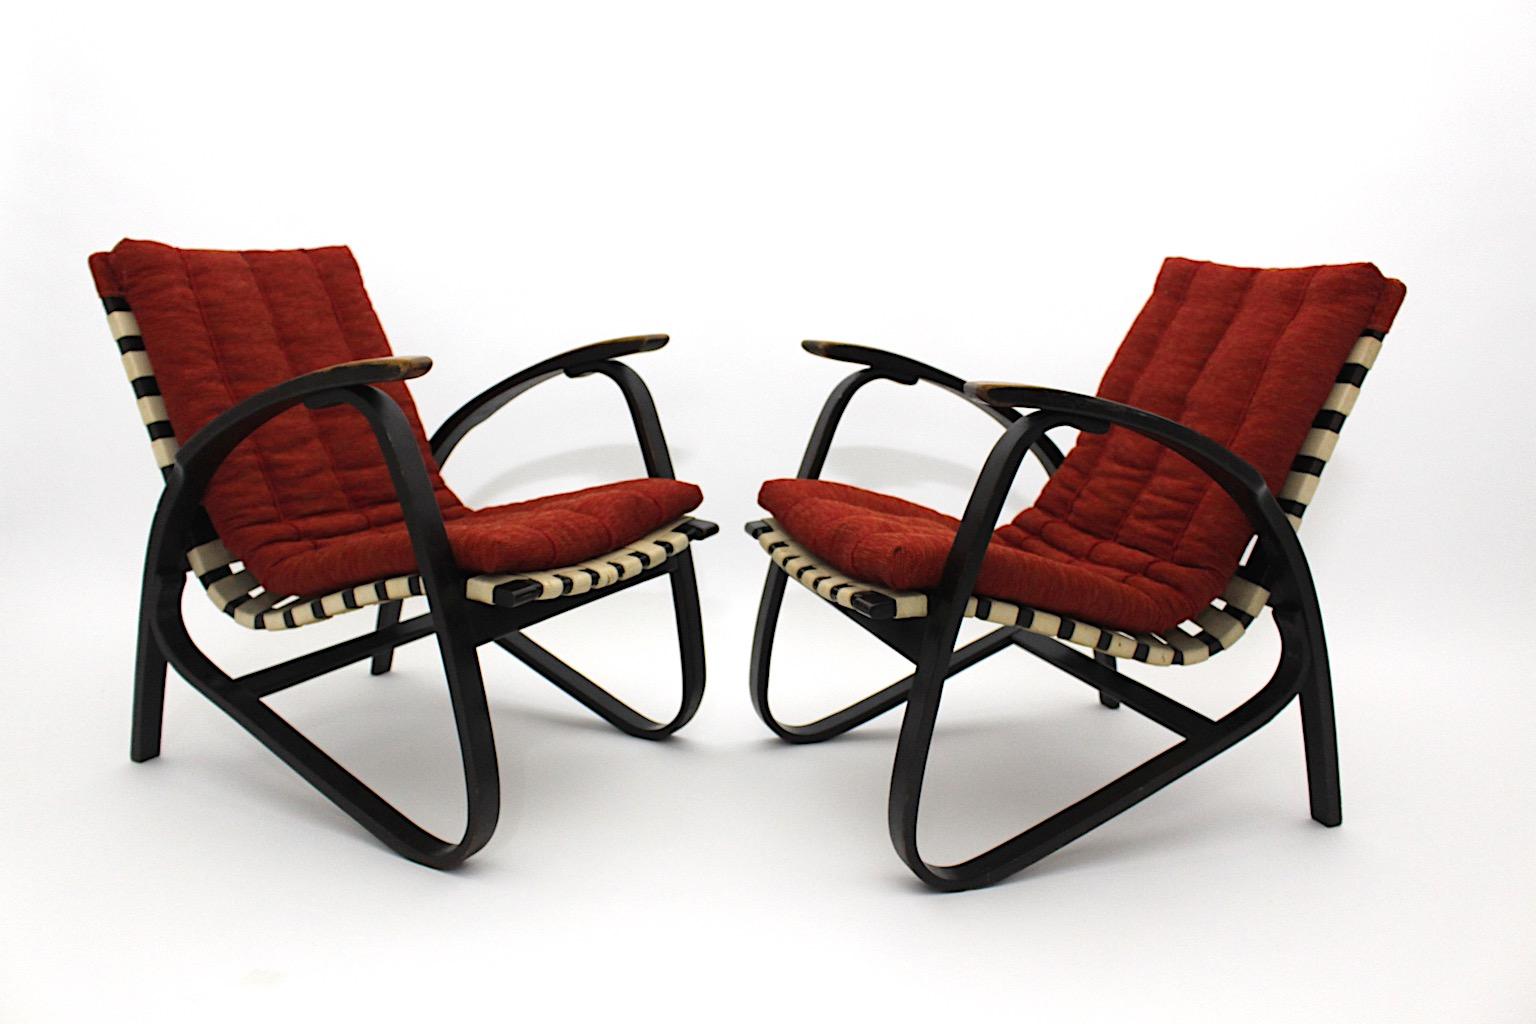 Art Deco Vintage Lounge Chairs Red Upholstery Pair Duo Jan Vanek 1940s For Sale 6